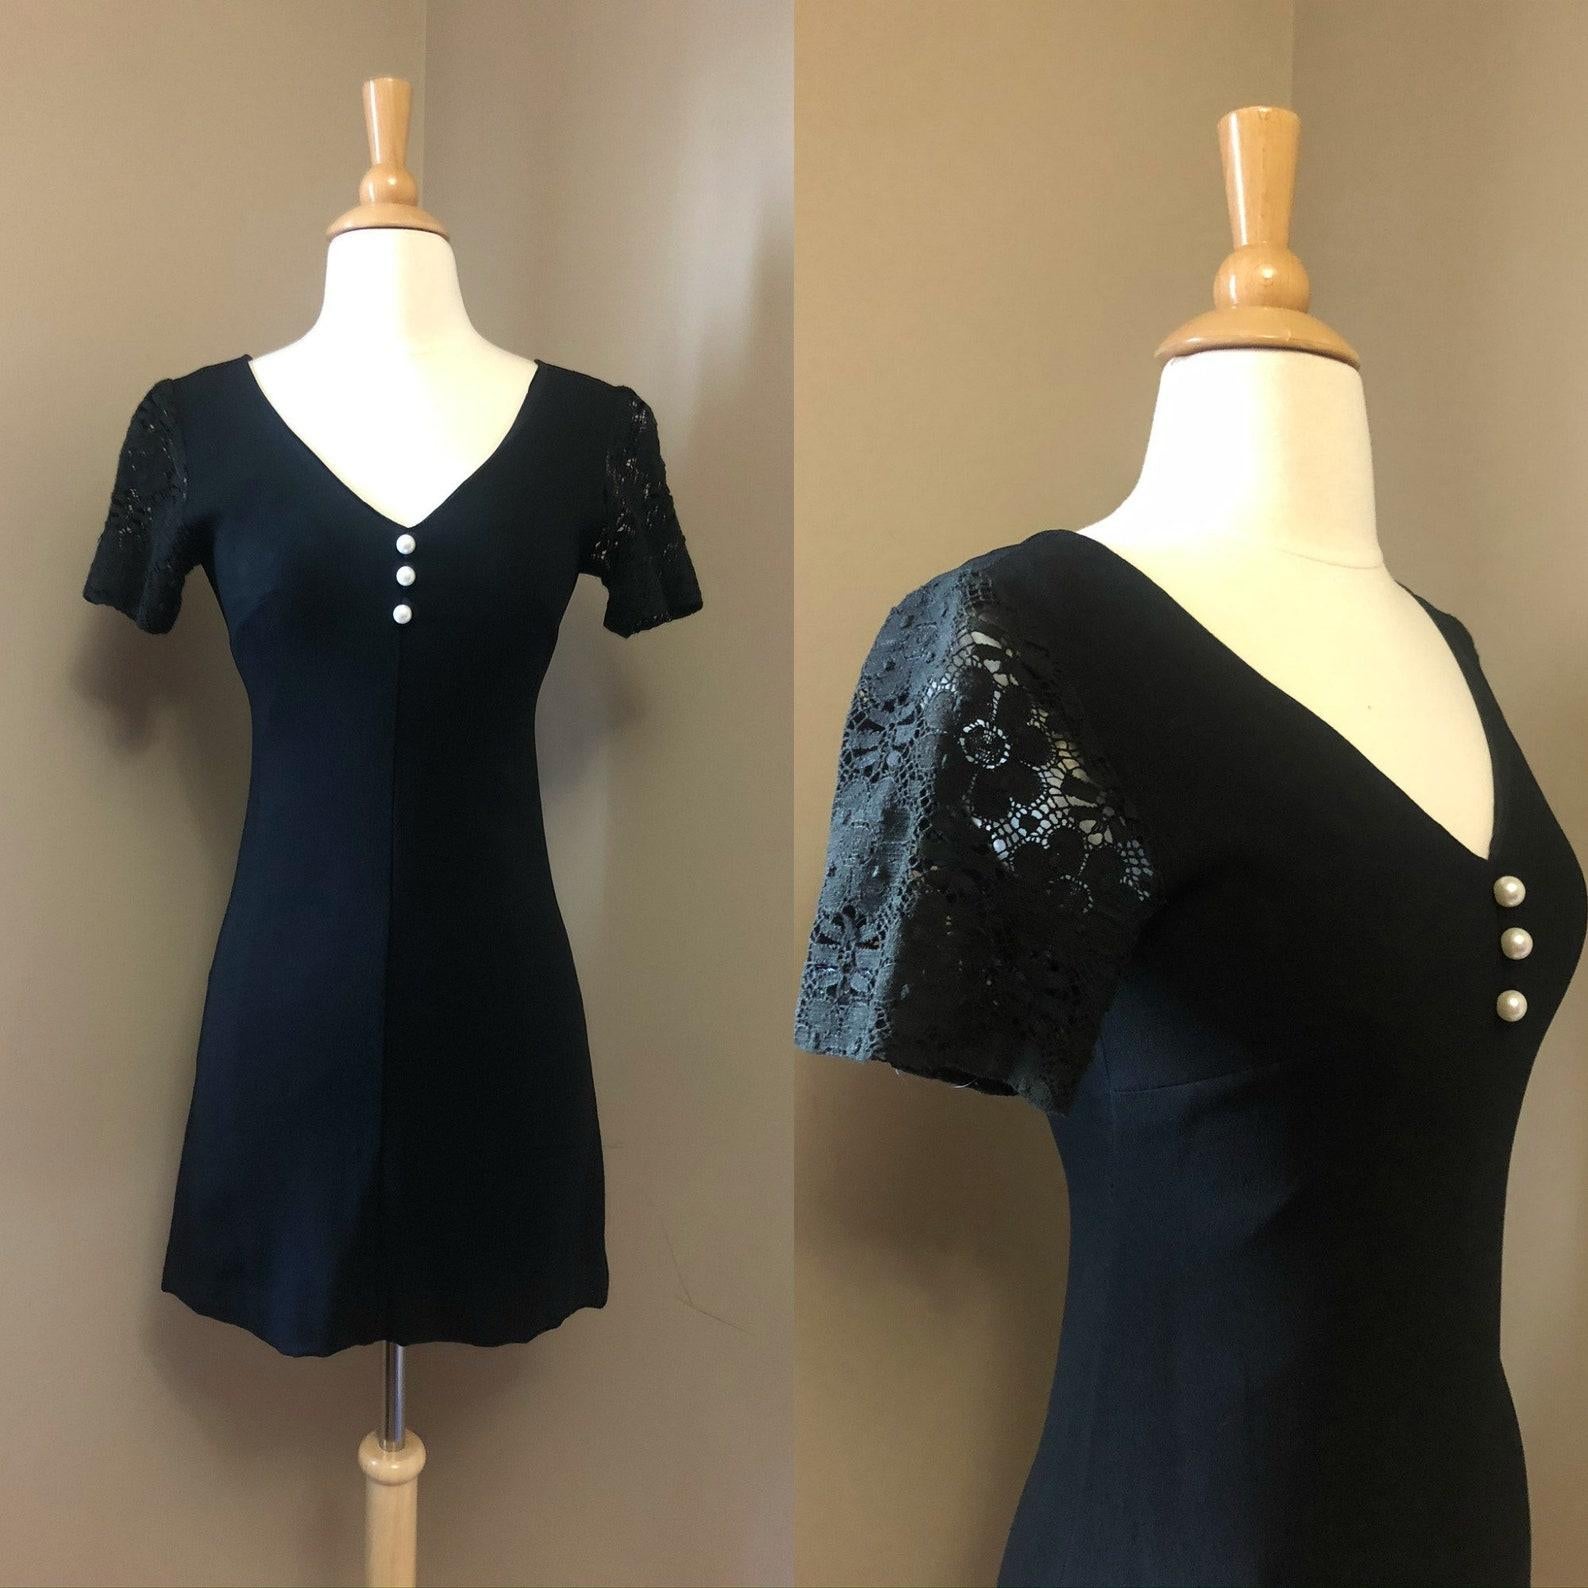 Rare vintage Radley of London black mini dress. A-line silhouette, v neck collar, short crochet lace sleeves. 
3 gum ball sized faux pearl decorative buttons along the bodice. 
Back metal zipper closure. 
Dress is lined, sleeves are unlined.

An